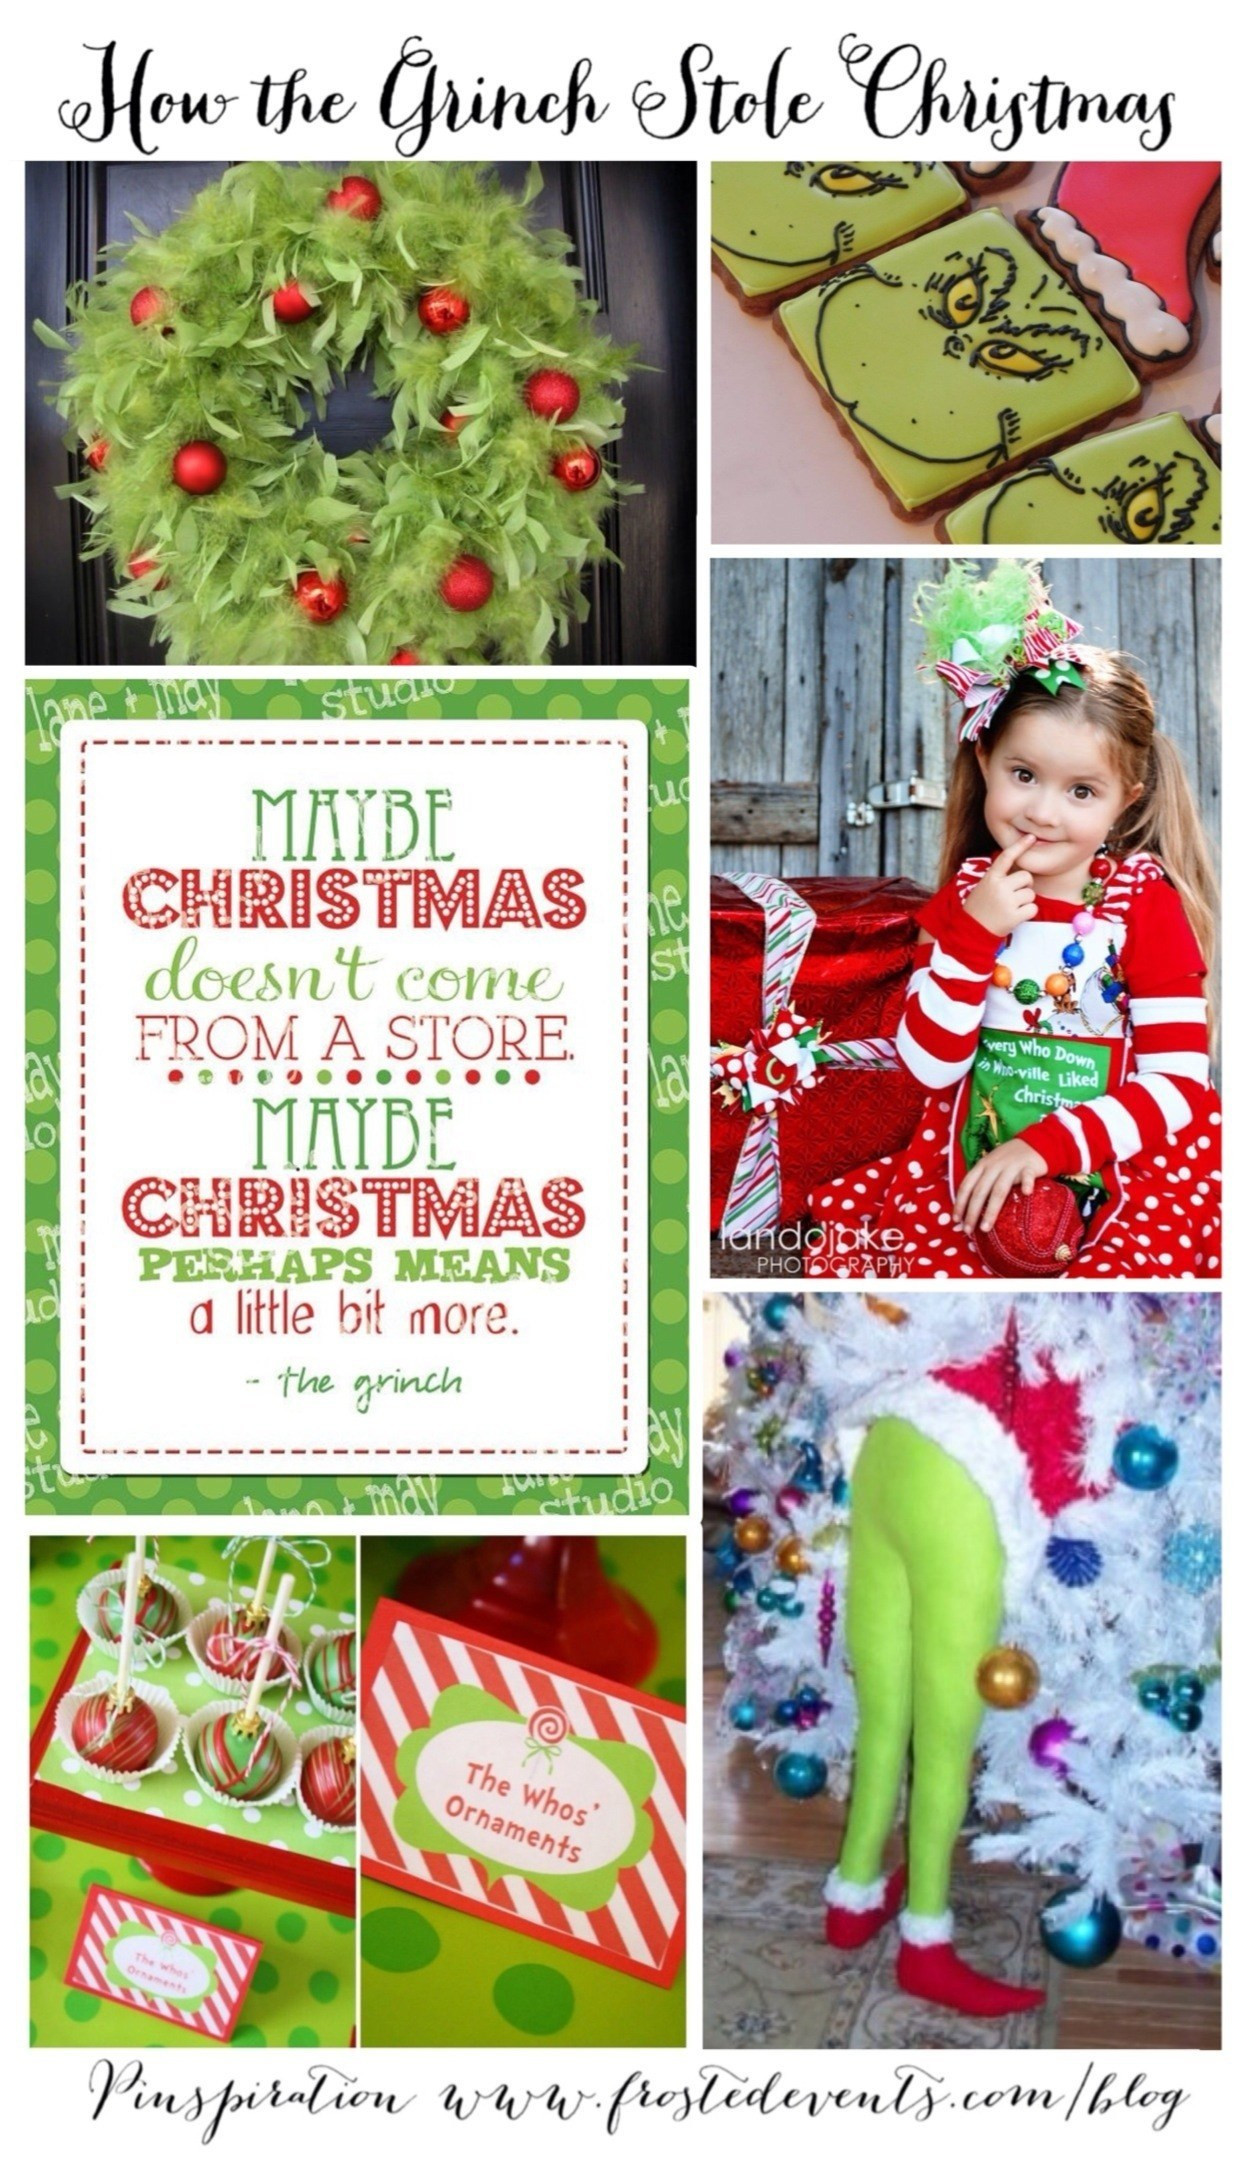 How The Grinch Stole Christmas Party Ideas
 Christmas Ideas How the Grinch Stole Christmas Inspiration